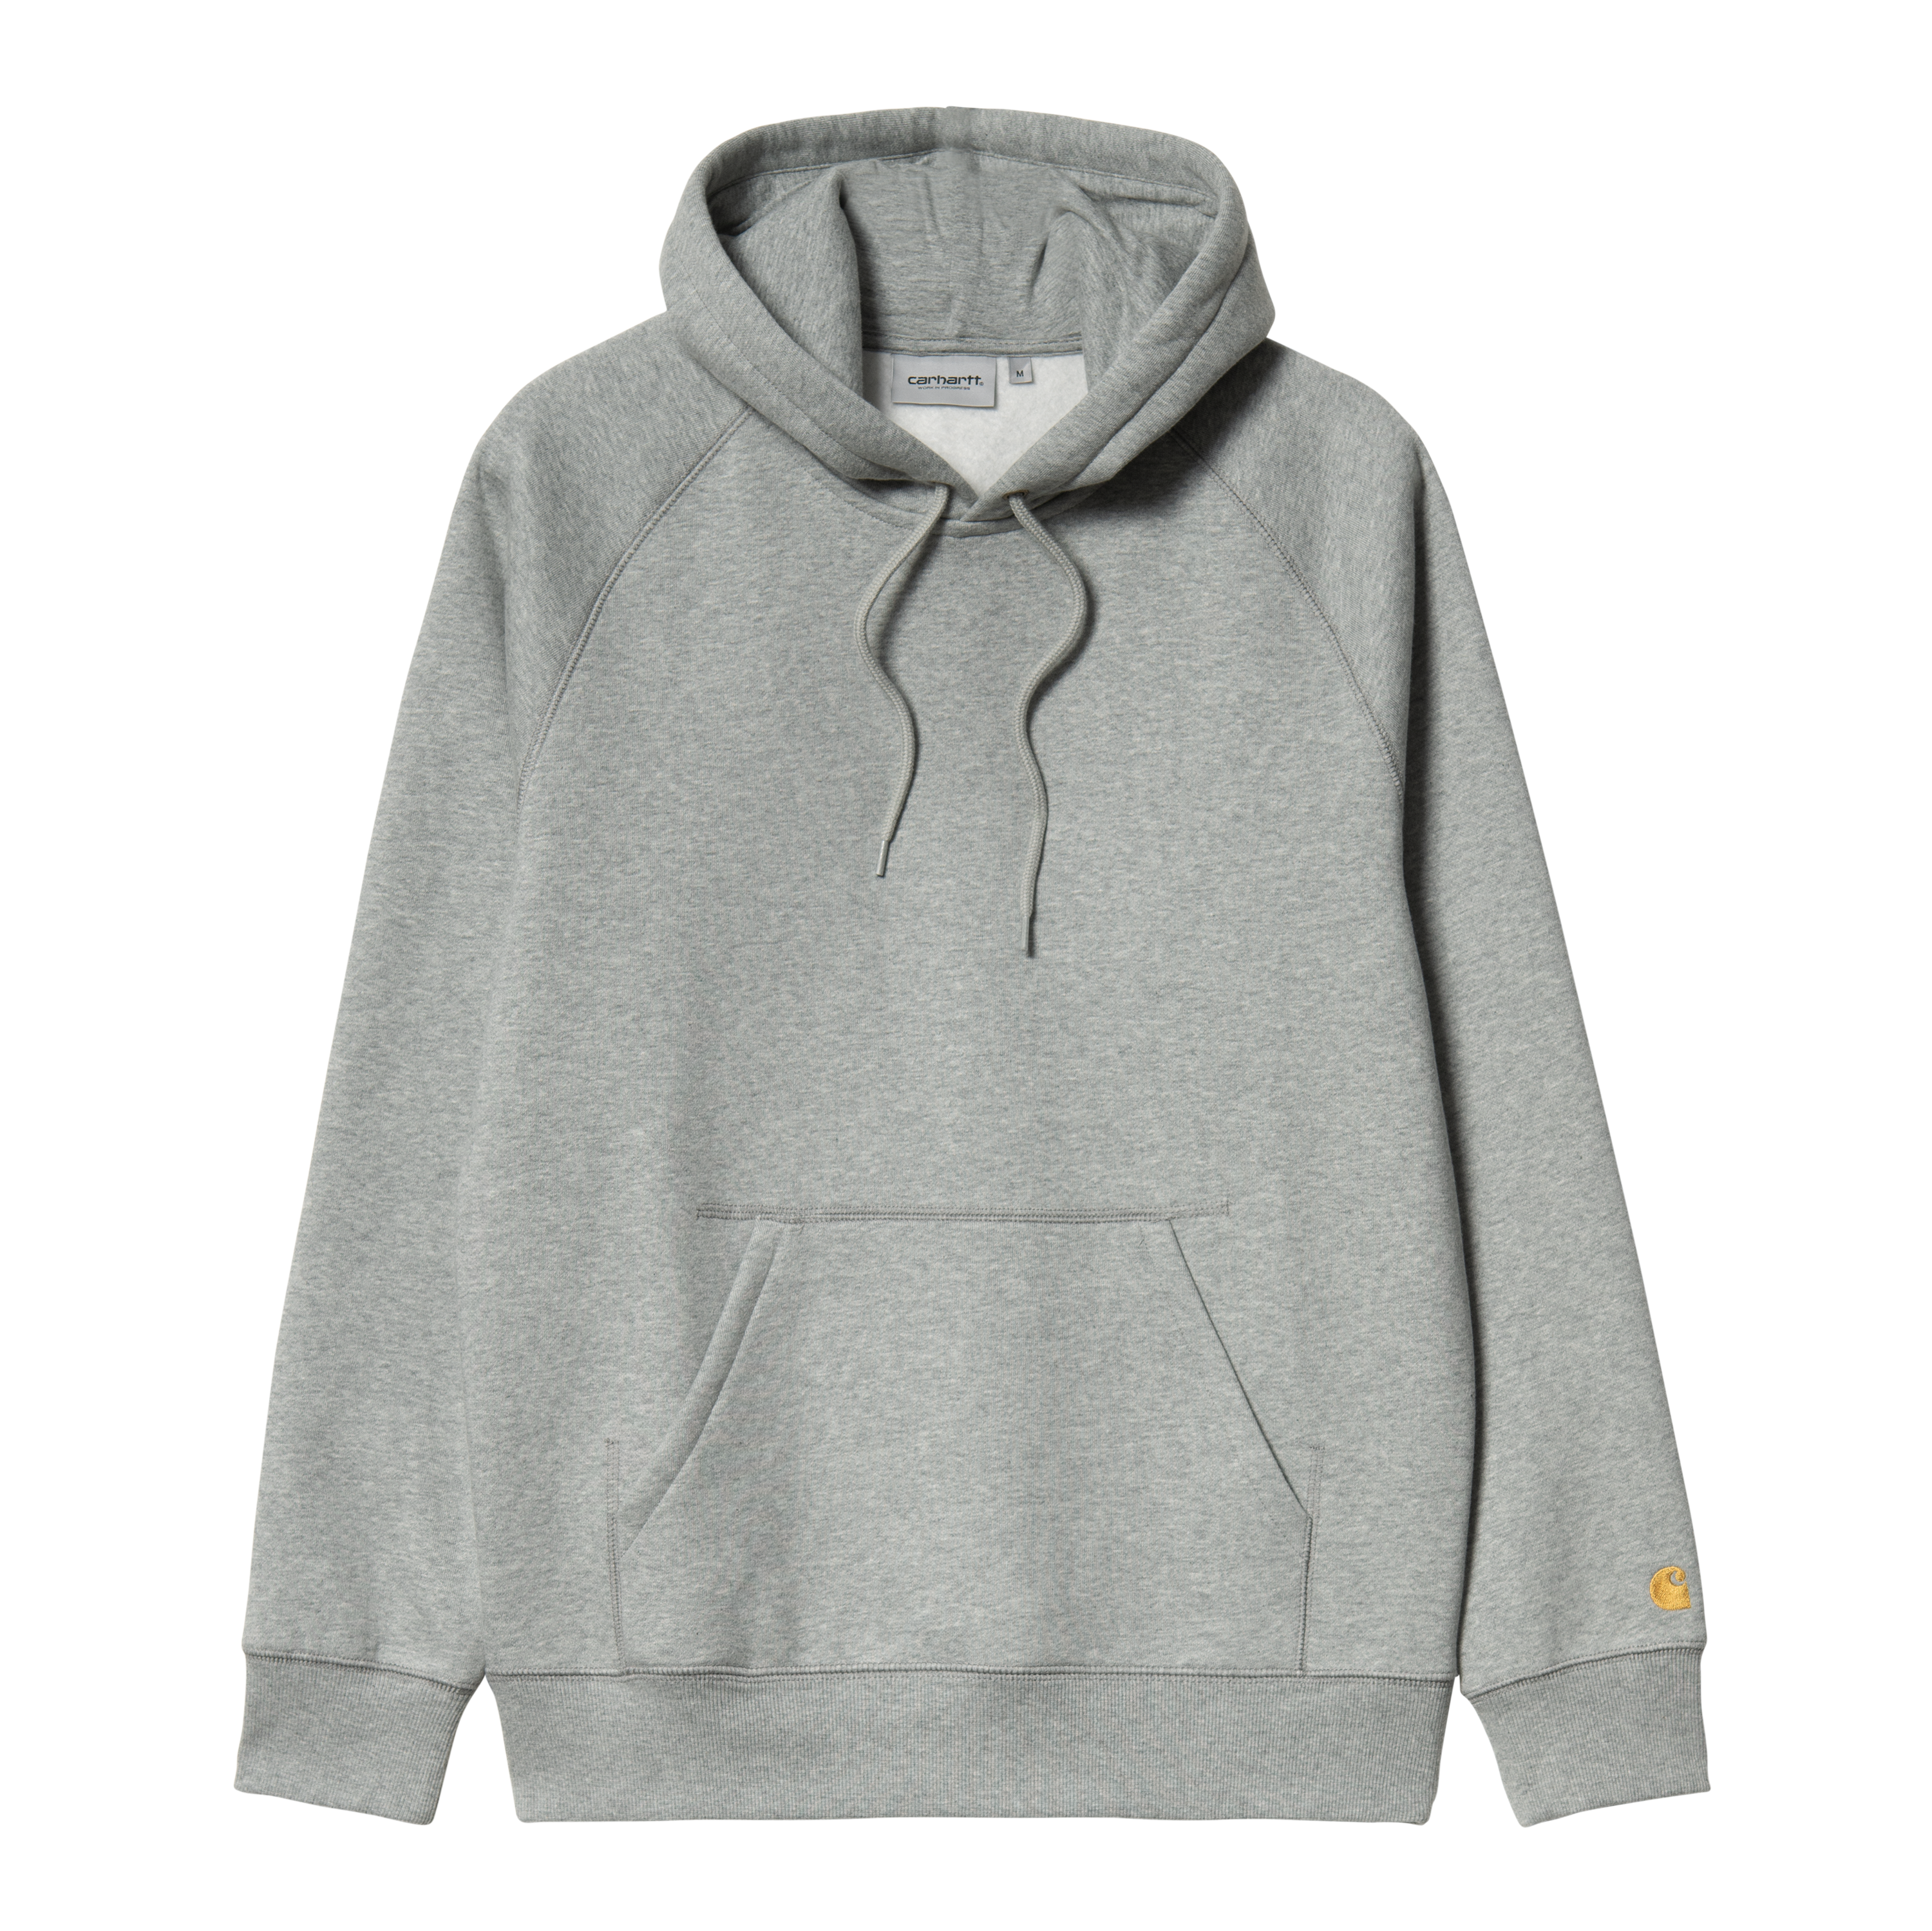 Carhartt WIP Hooded Chase Sweat in Grey